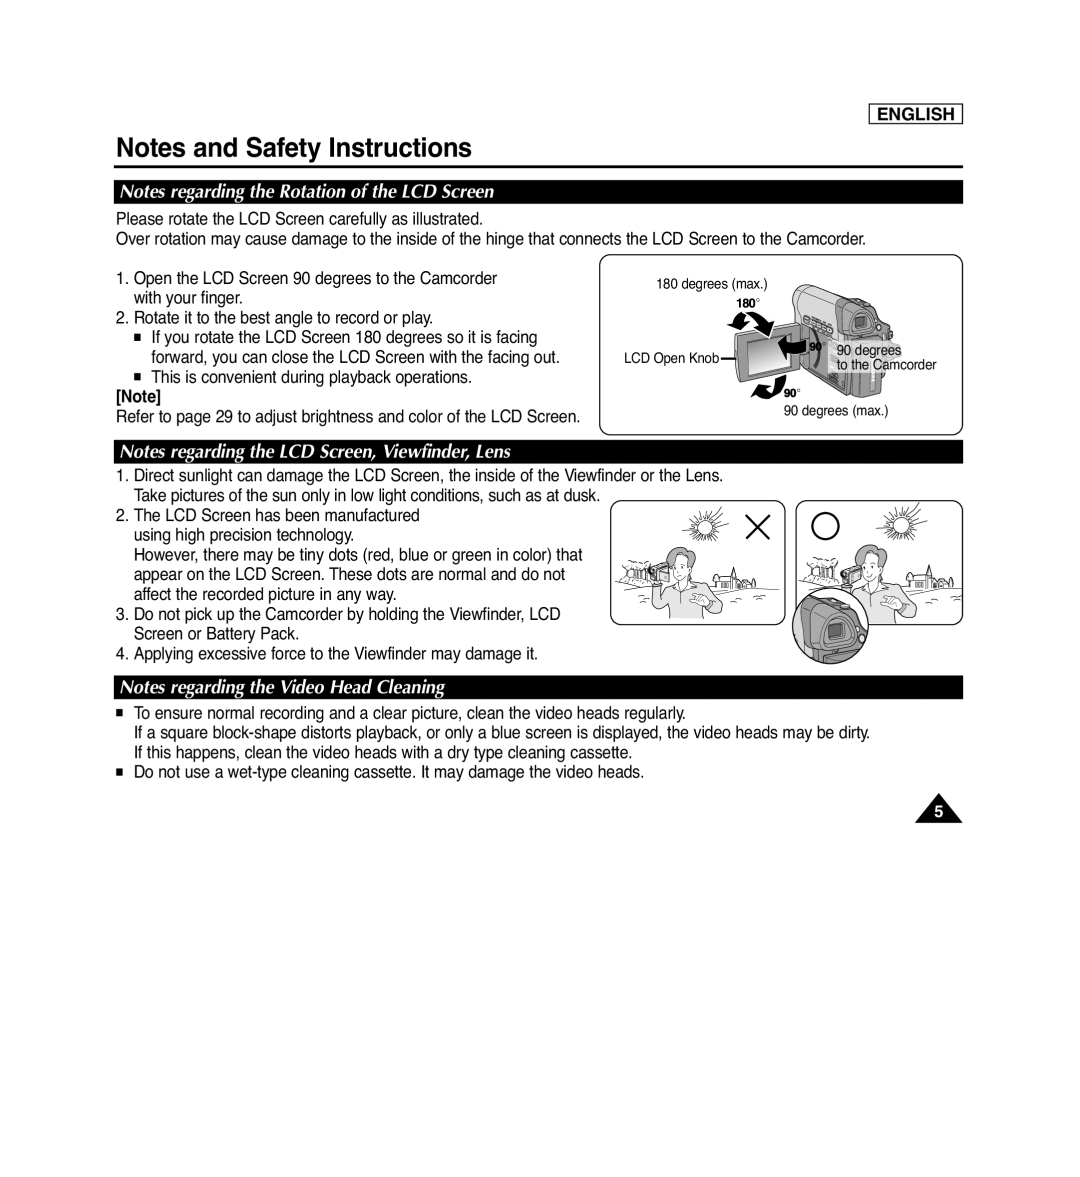 Samsung SC-D366, SC-D263, SC-D364 Notes and Safety Instructions, Notes regarding the Rotation of the LCD Screen, English 